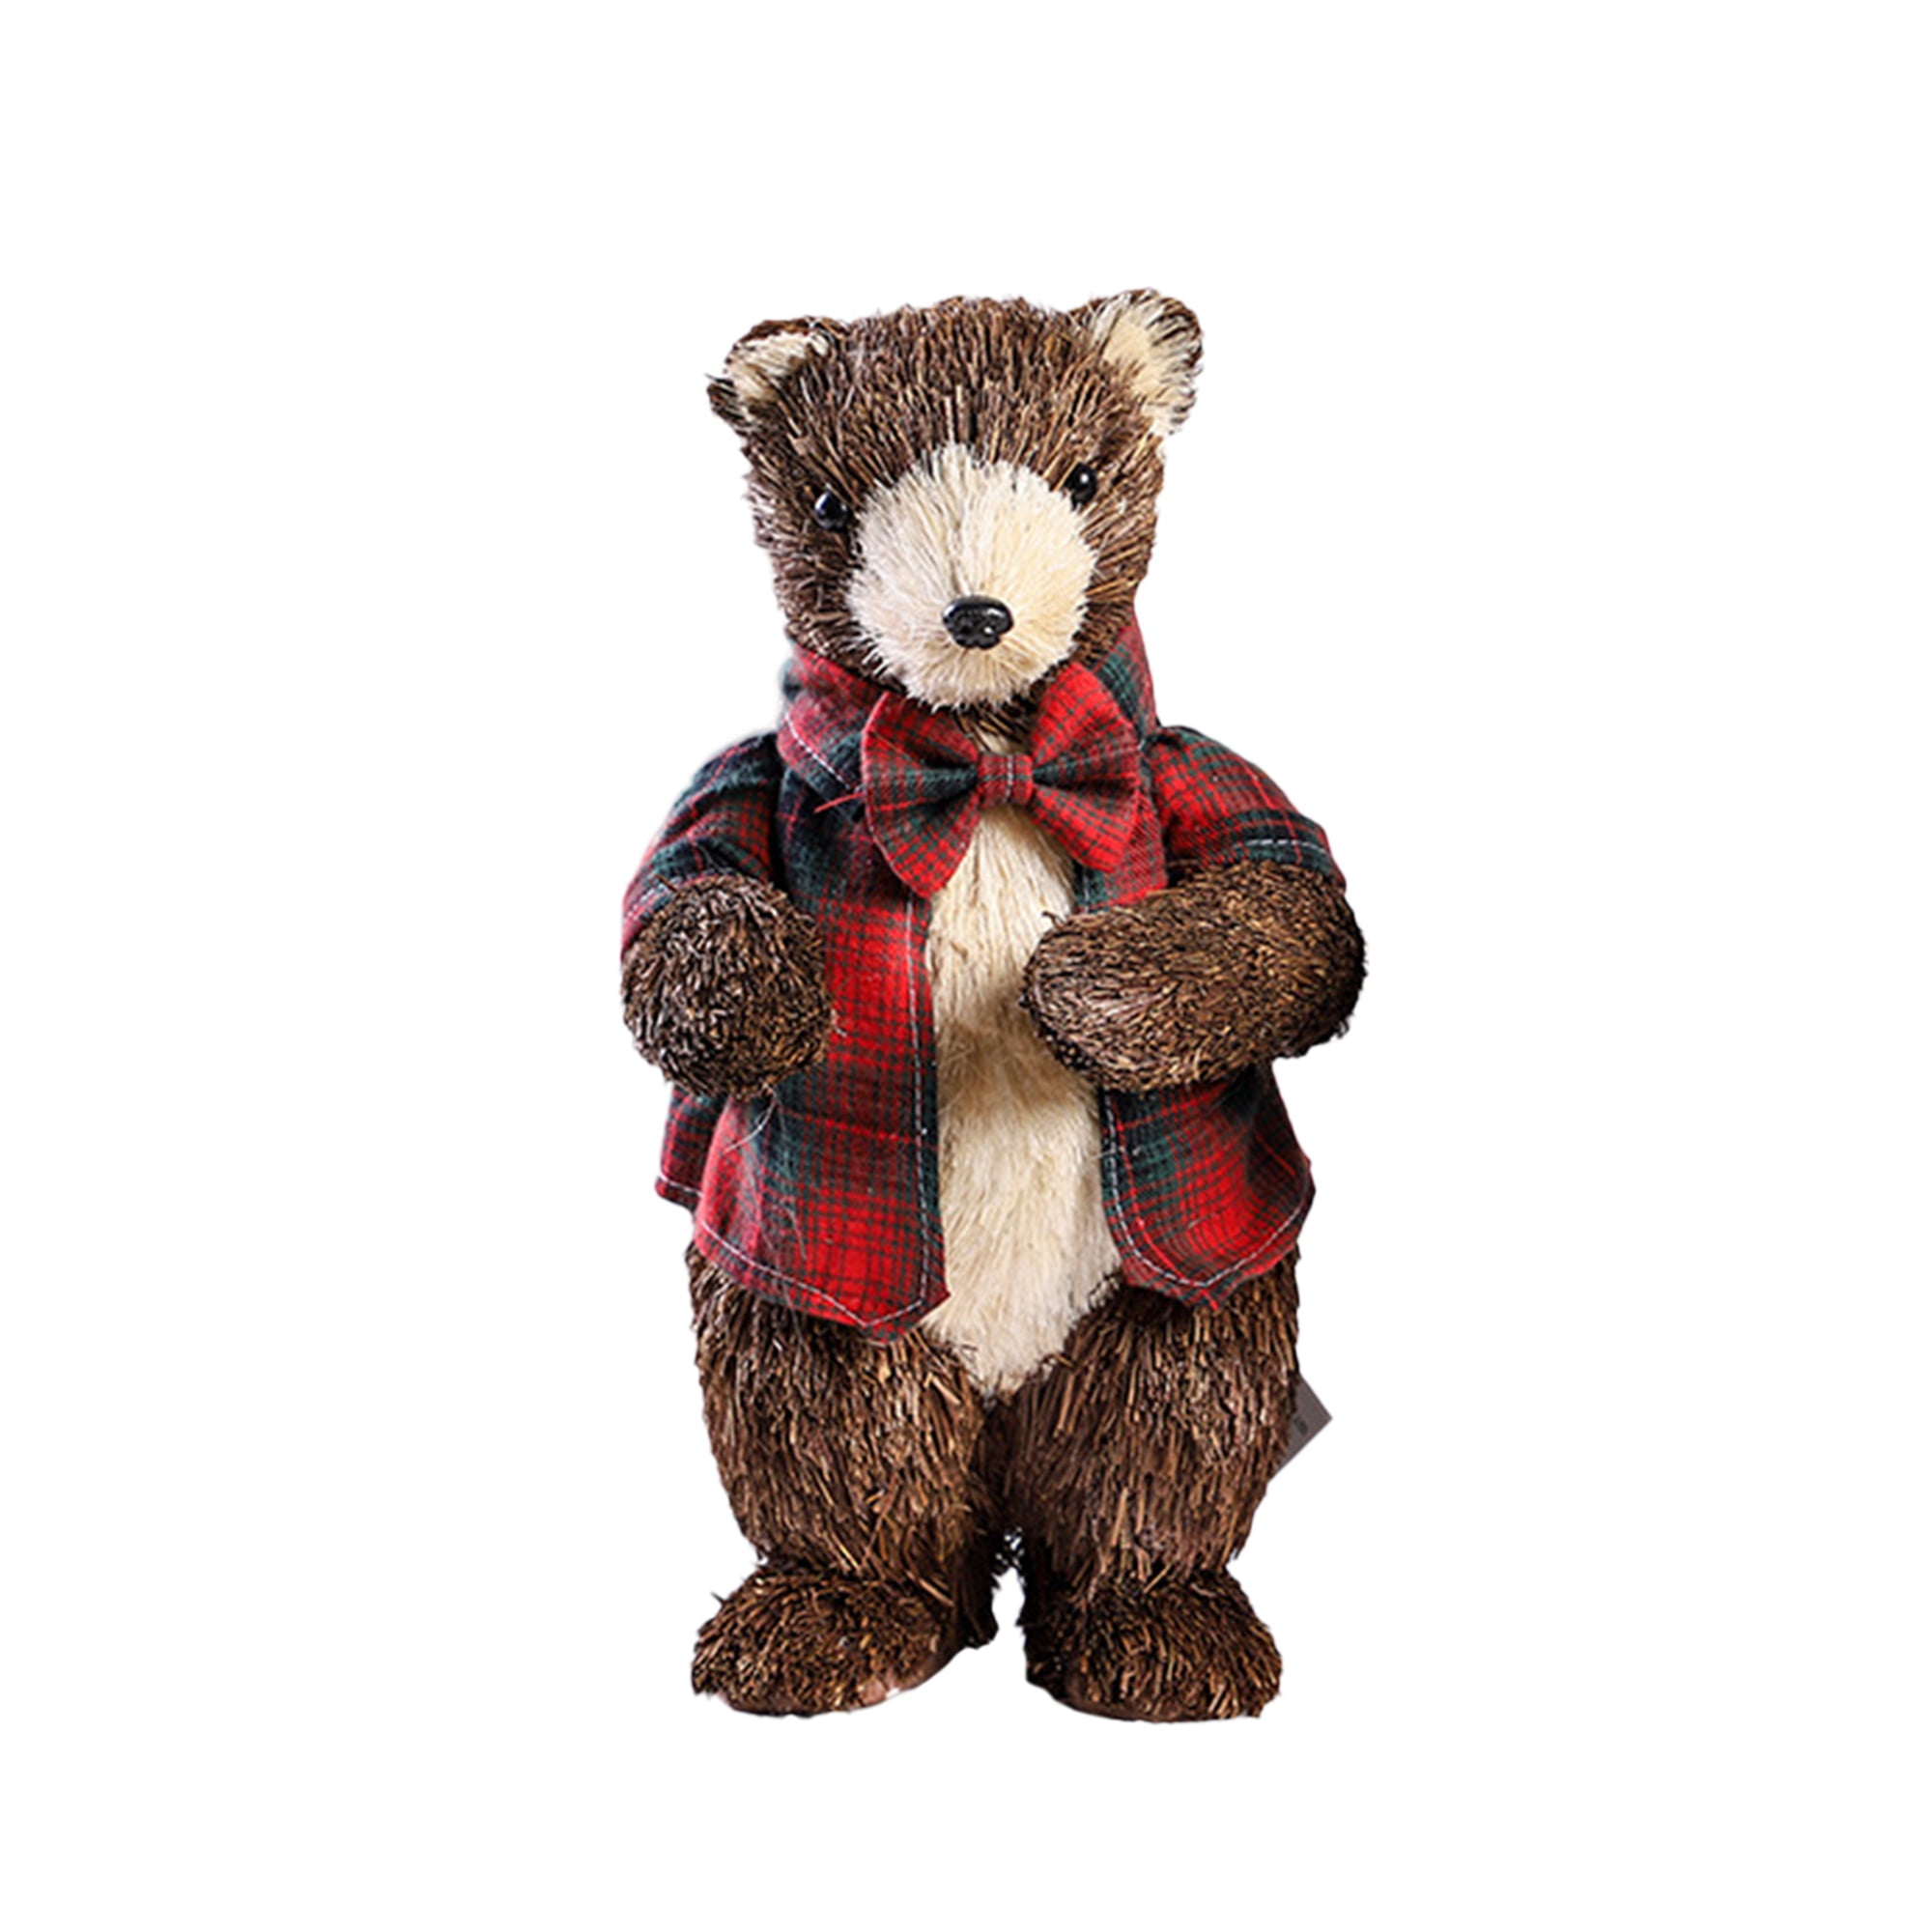 Details about   Valentine's day Gifts 38 In Super Soft & Plush Cute Teddy Bear With Premium Fur 